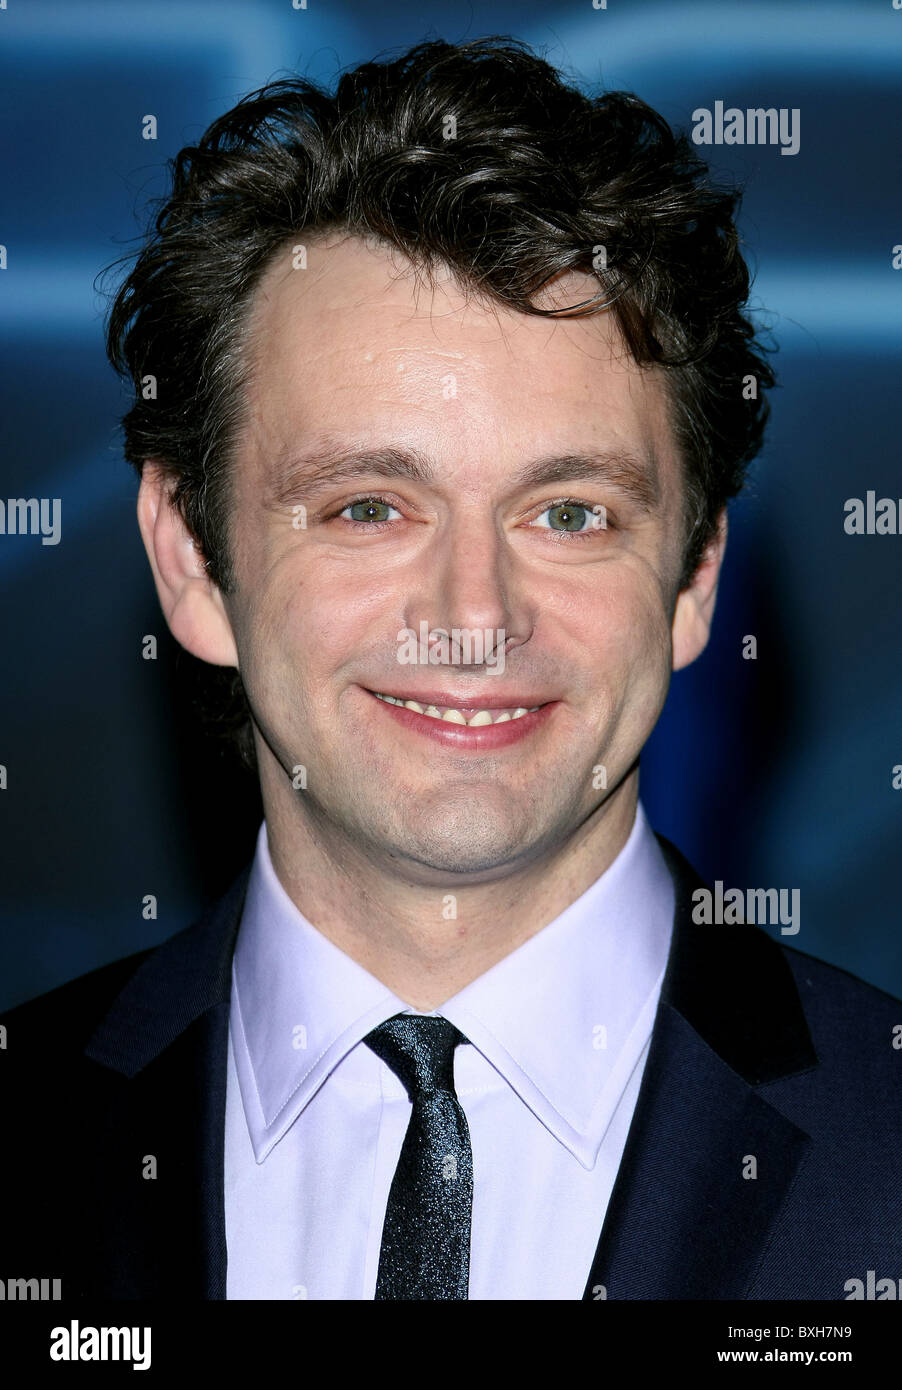 MICHAEL SHEEN TRON: LEGACY WORLD PREMIERE HOLLYWOOD LOS ANGELES CALIFORNIA USA 11 December 2010 Stock Photo